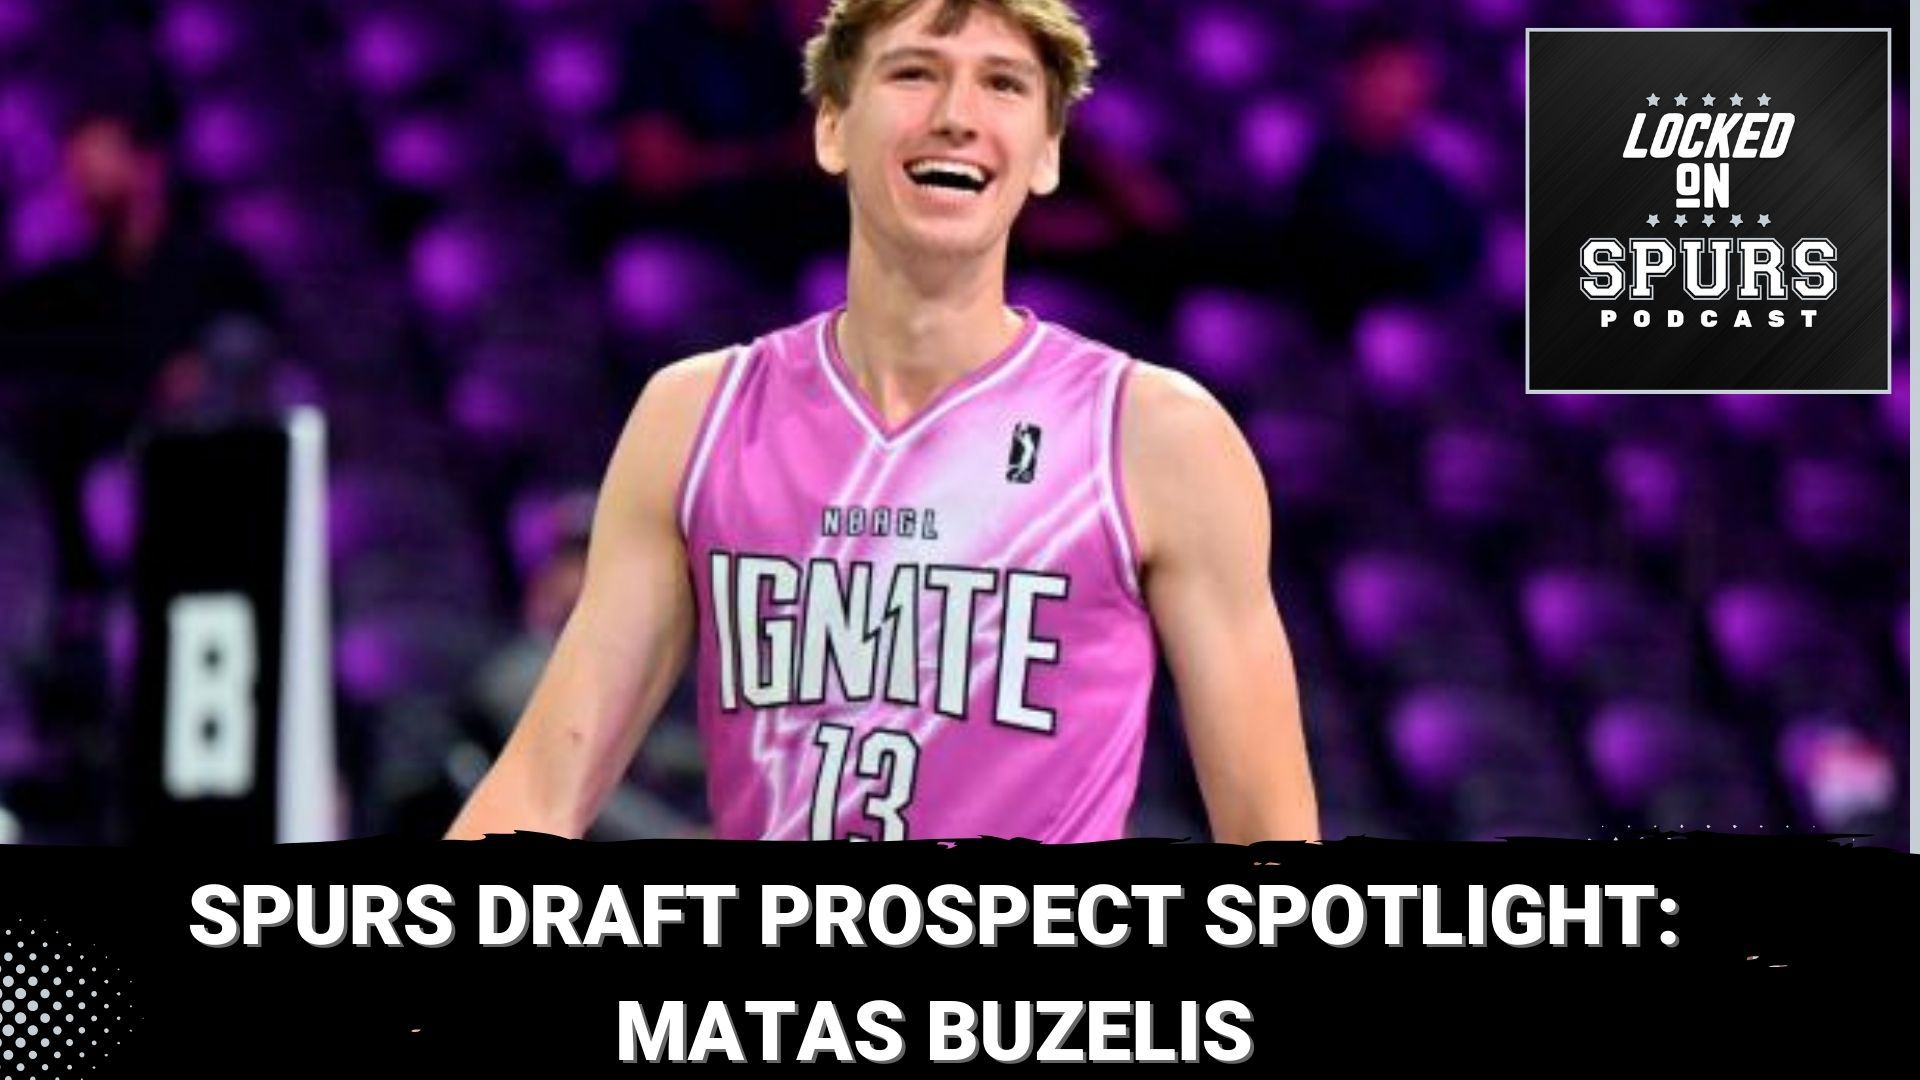 Should the Spurs select Buzelis with one of their first-round picks in the NBA Draft?